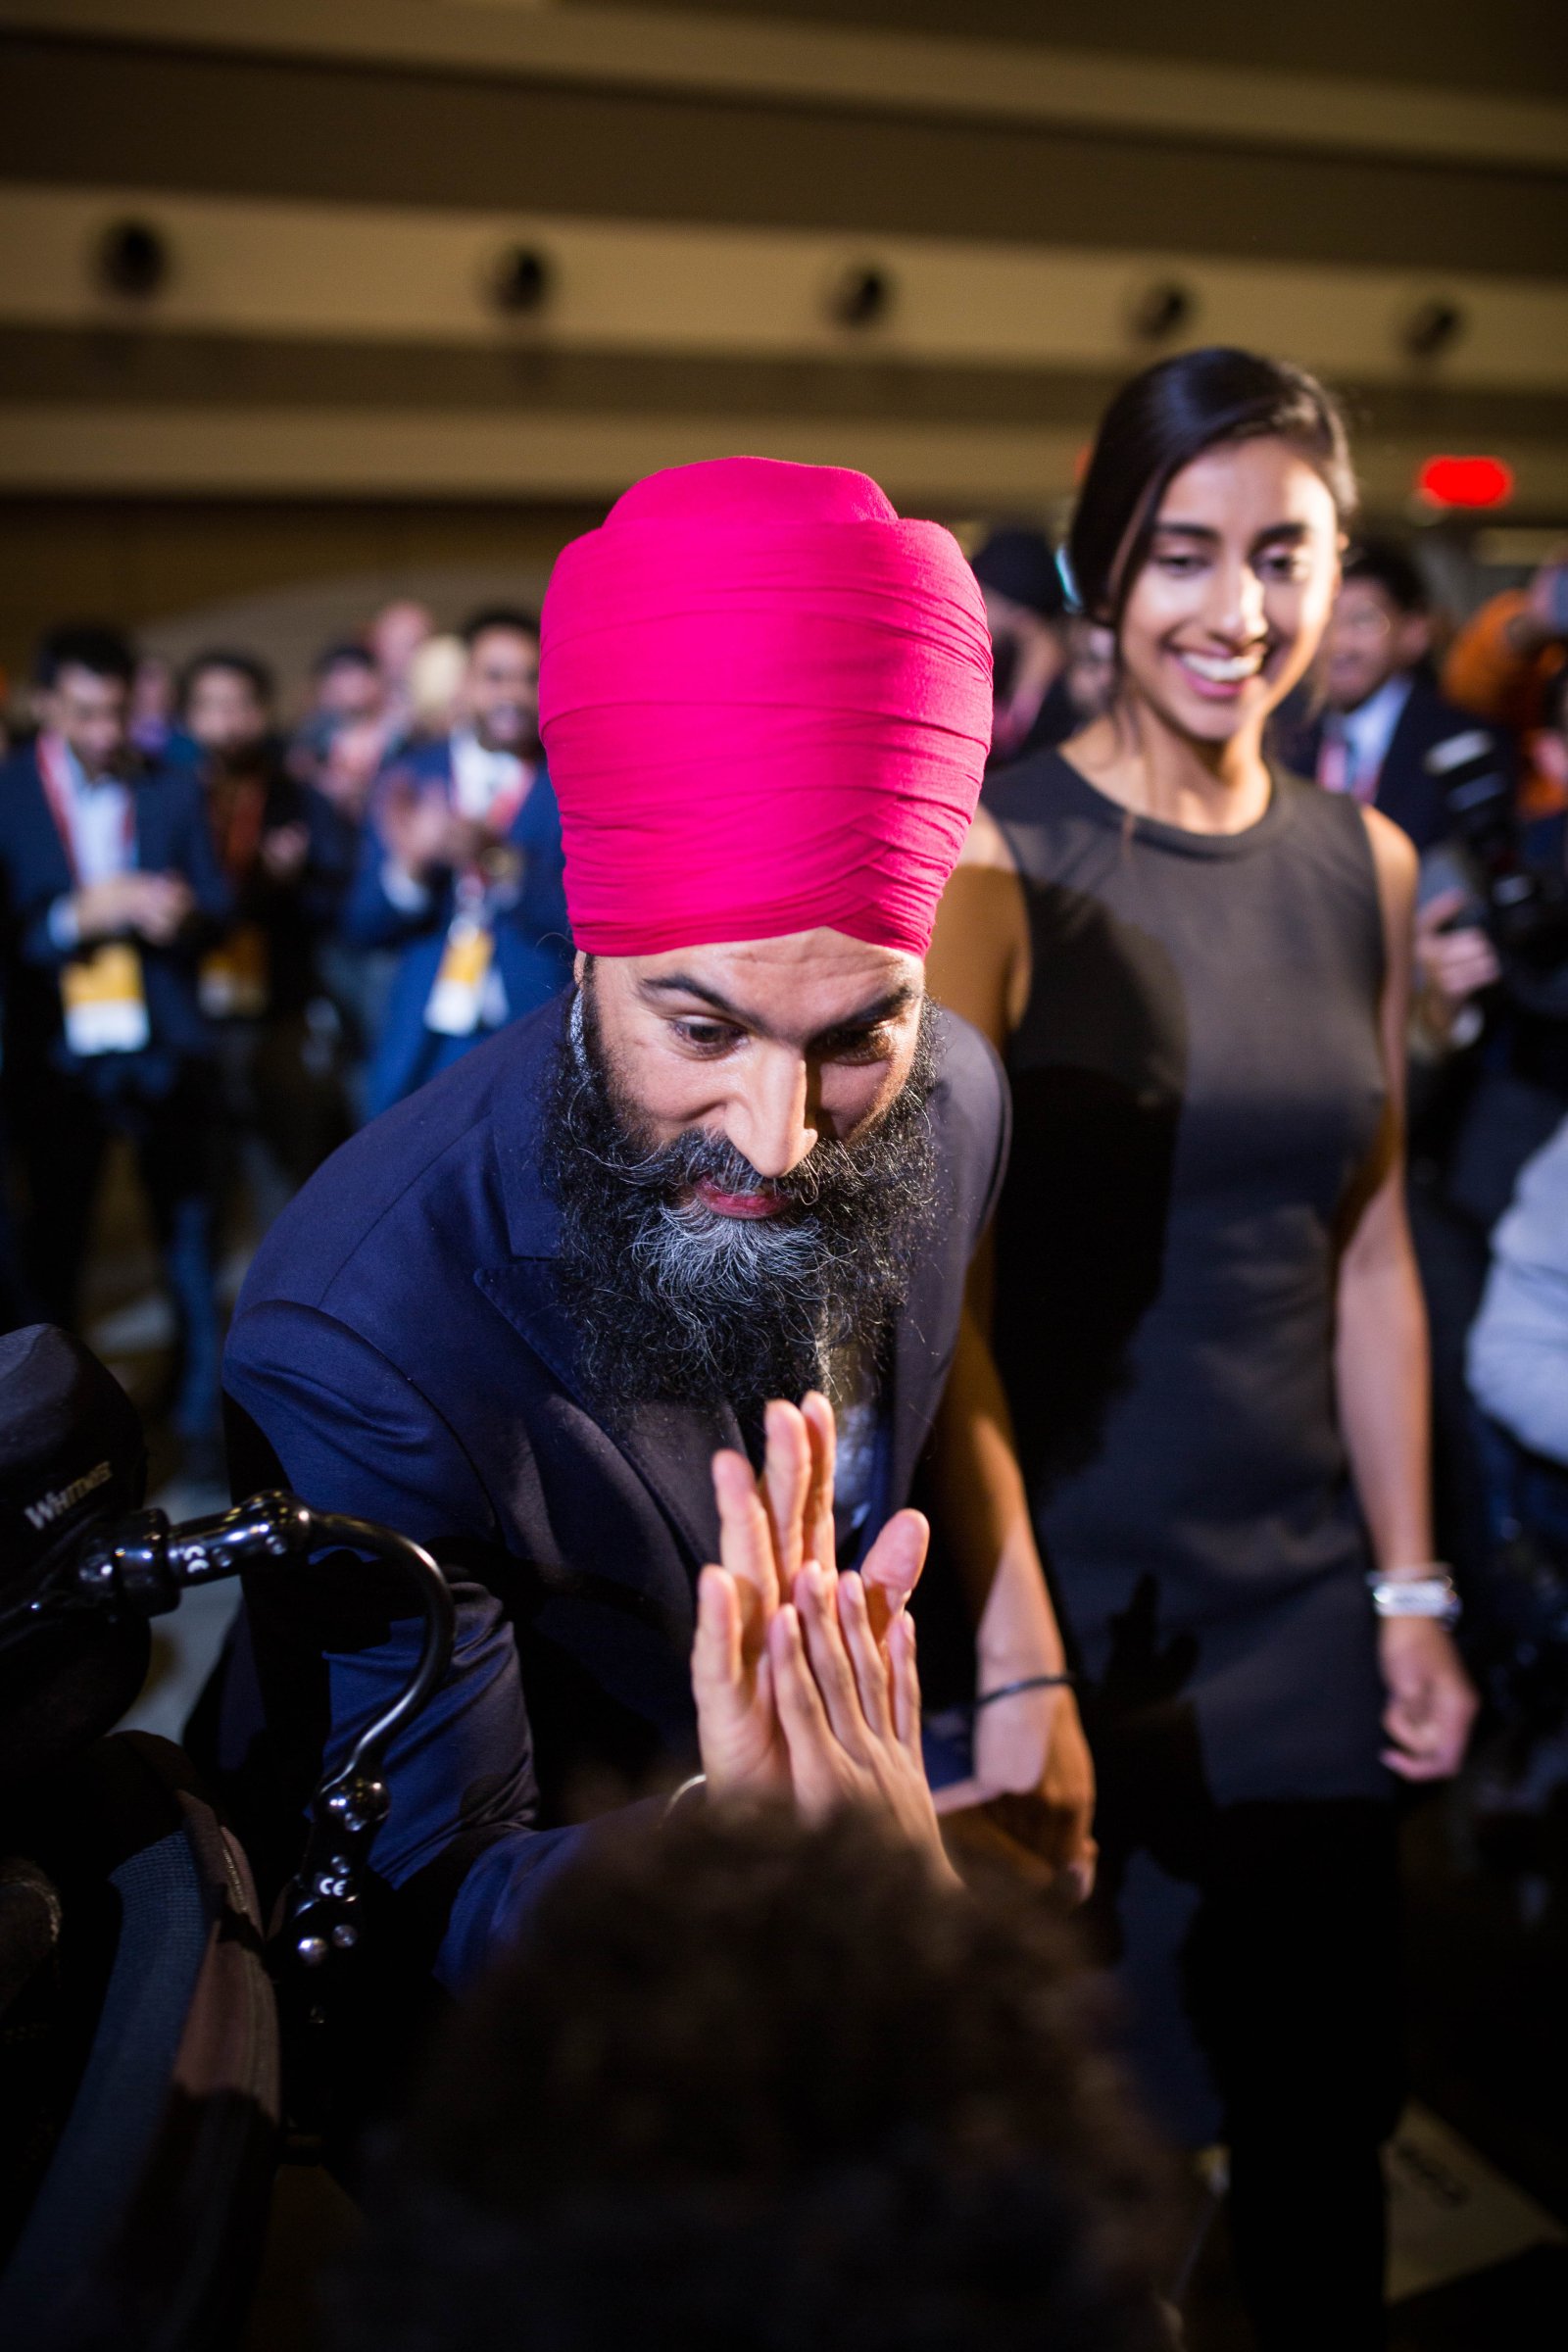 NDP leader Jagmeet Singh, accompanied by his fiance Gurkiran Kaur, greet delegates at the NDP's national convention in Ottawa on Feb. 17, 2018. Photo by Alex Tétreault 